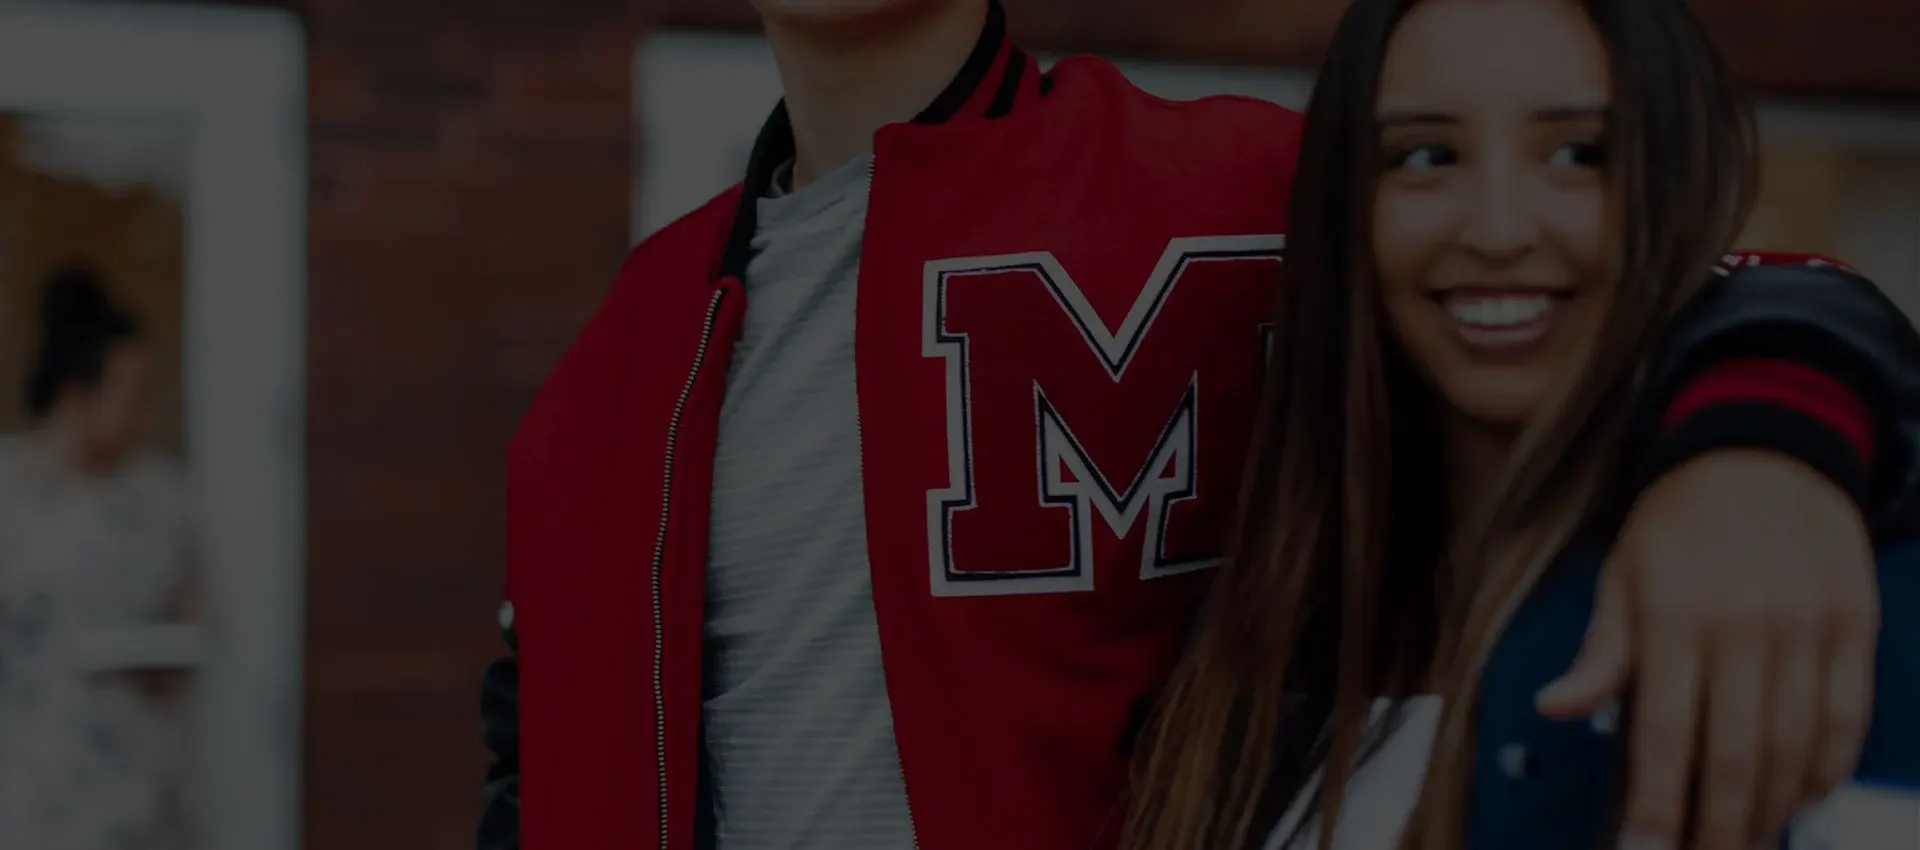 High School<br /> Letter Jackets